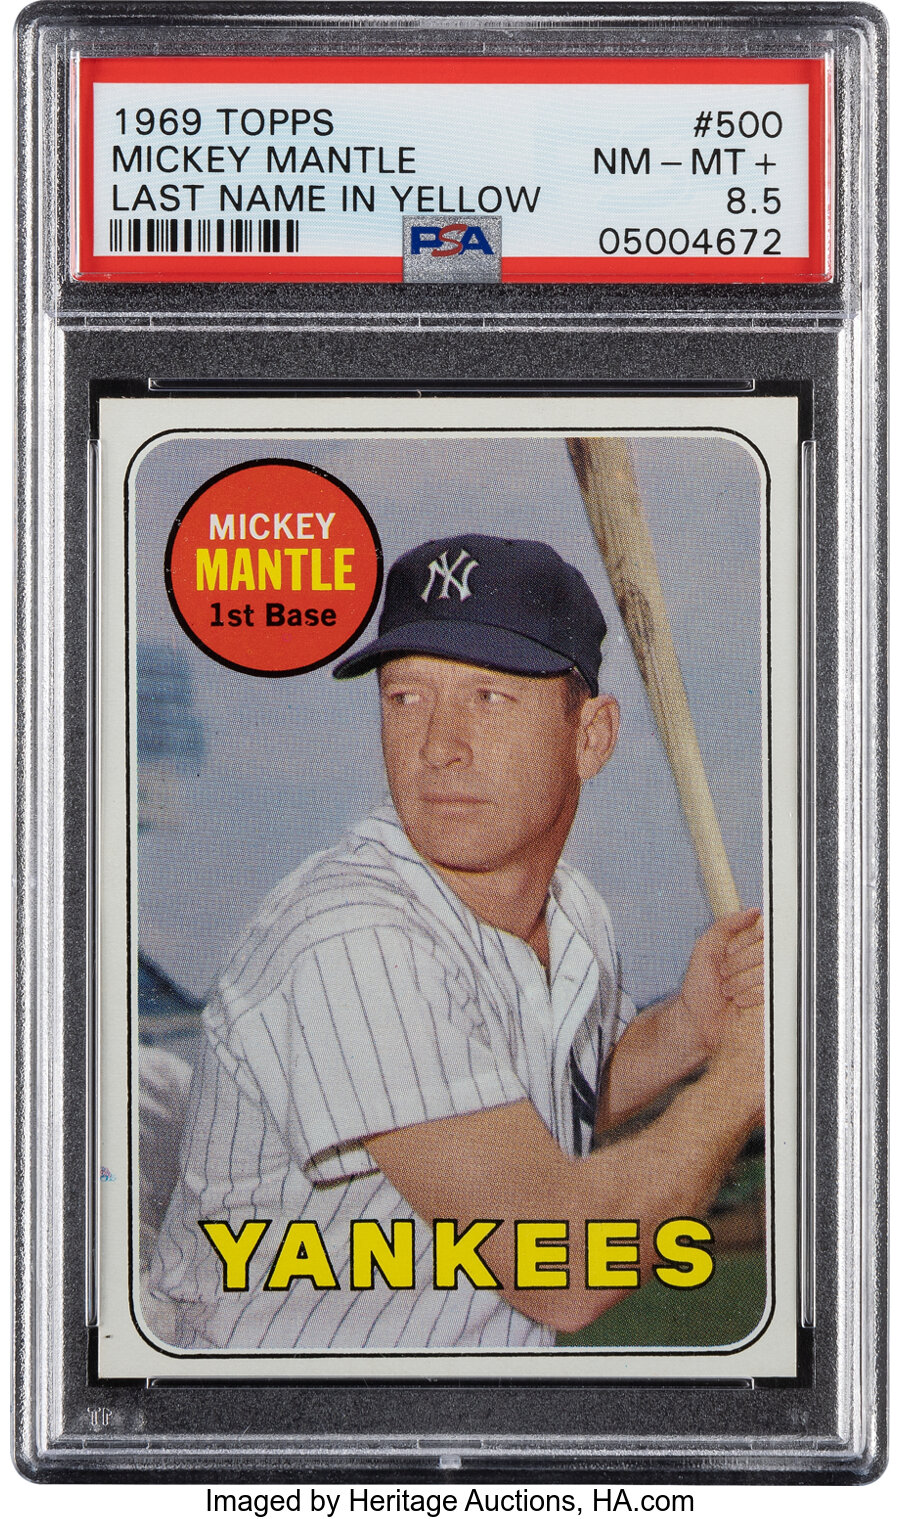 1969 Topps Mickey Mantle (Last Name In Yellow) #500 PSA NM-MT+ 8.5